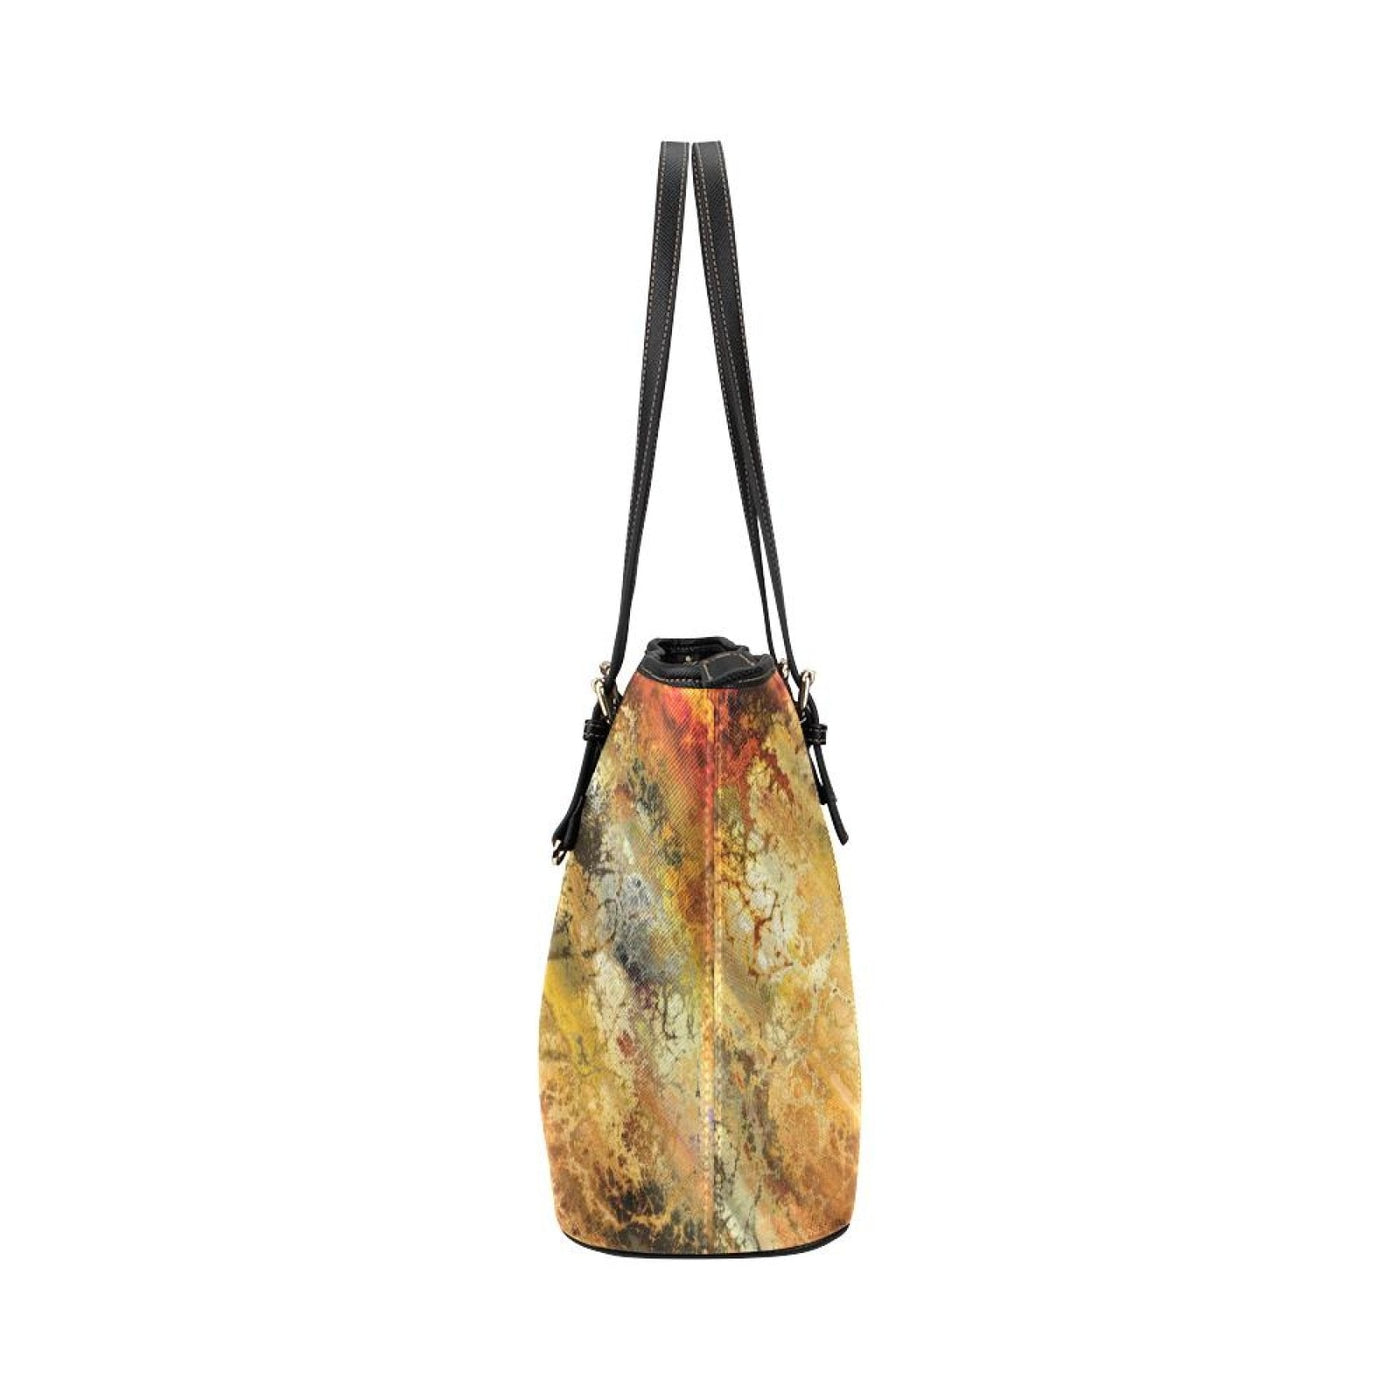 Large Leather Tote Shoulder Bag - With Abstract Rustic Marble Design - Bags |